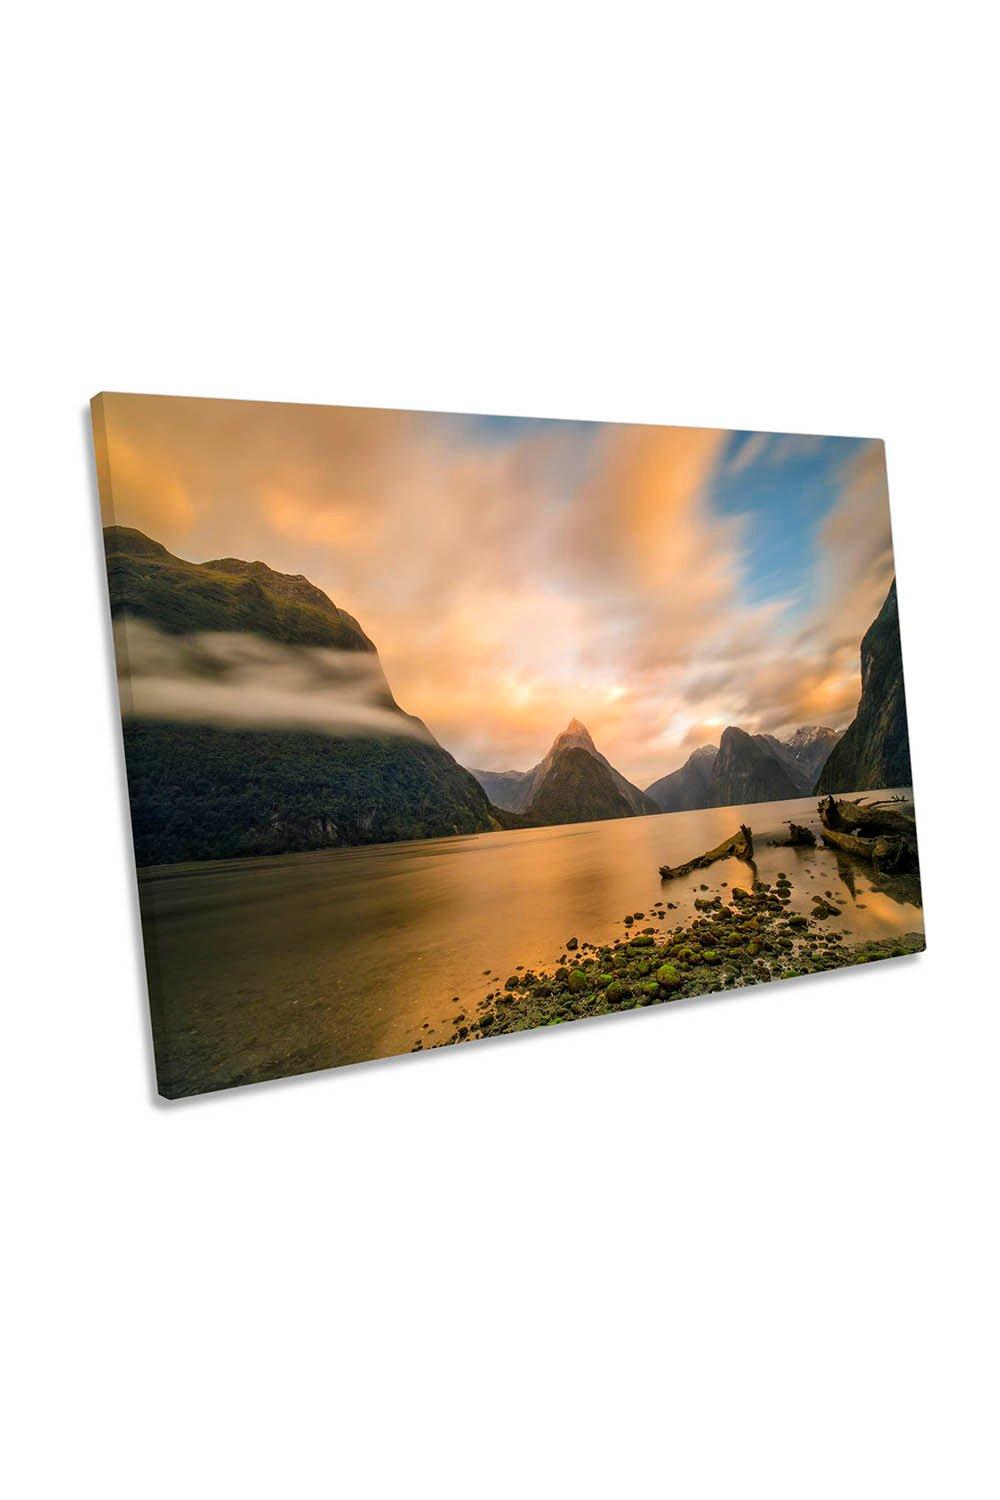 Milford Lake Sunset New Zealand Landscape Canvas Wall Art Picture Print